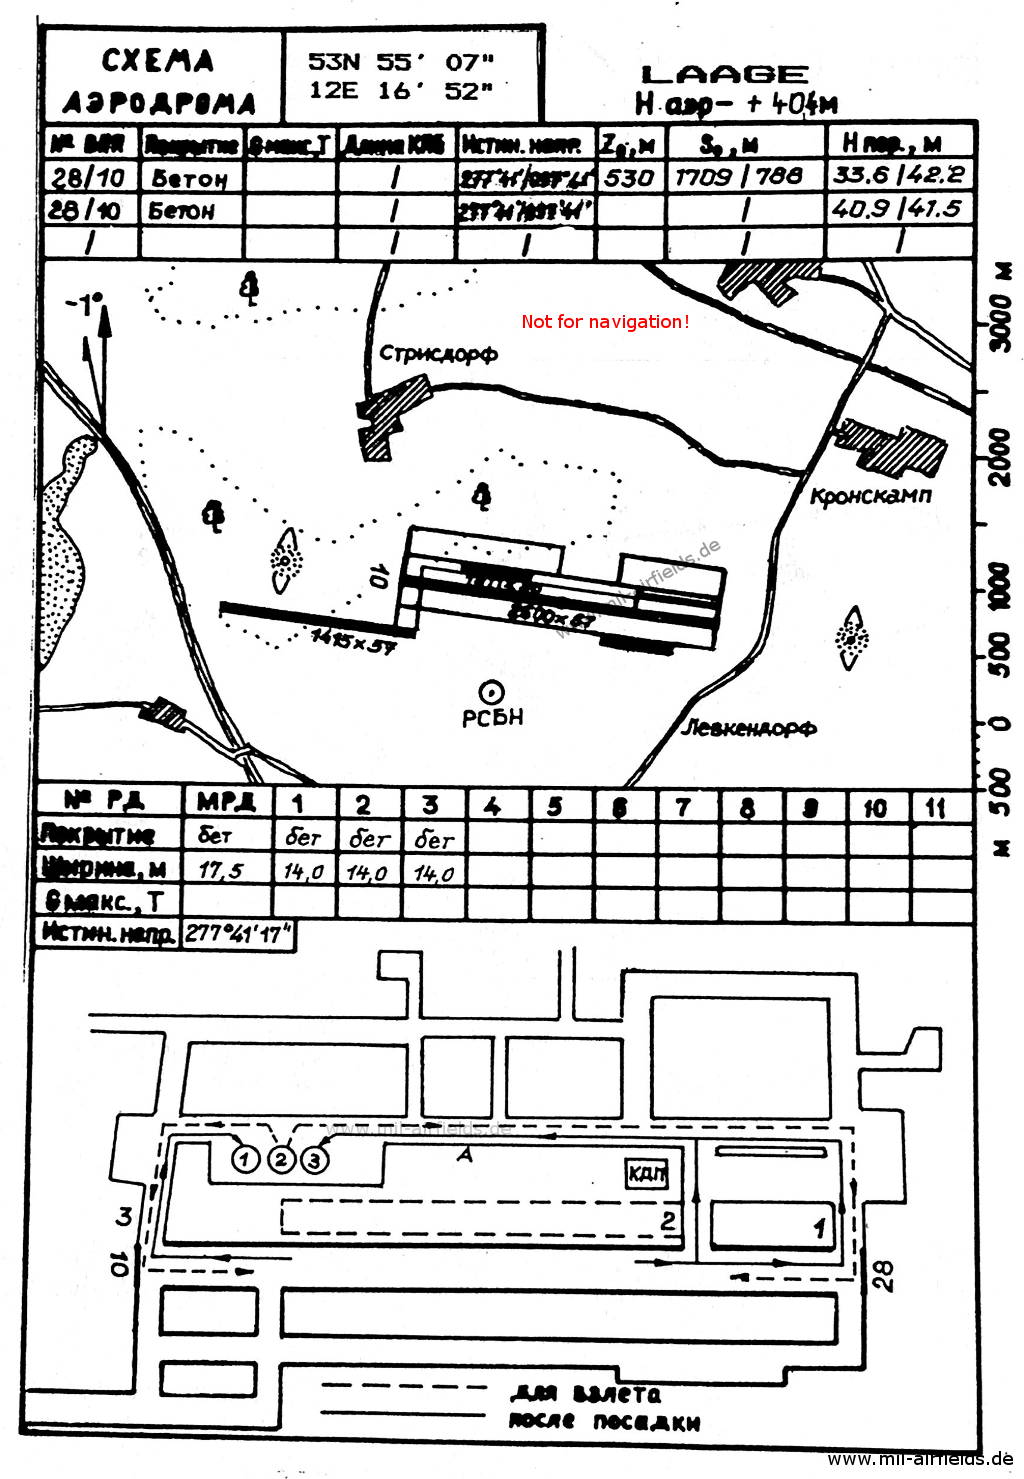 Map of Laage Airfield 1989